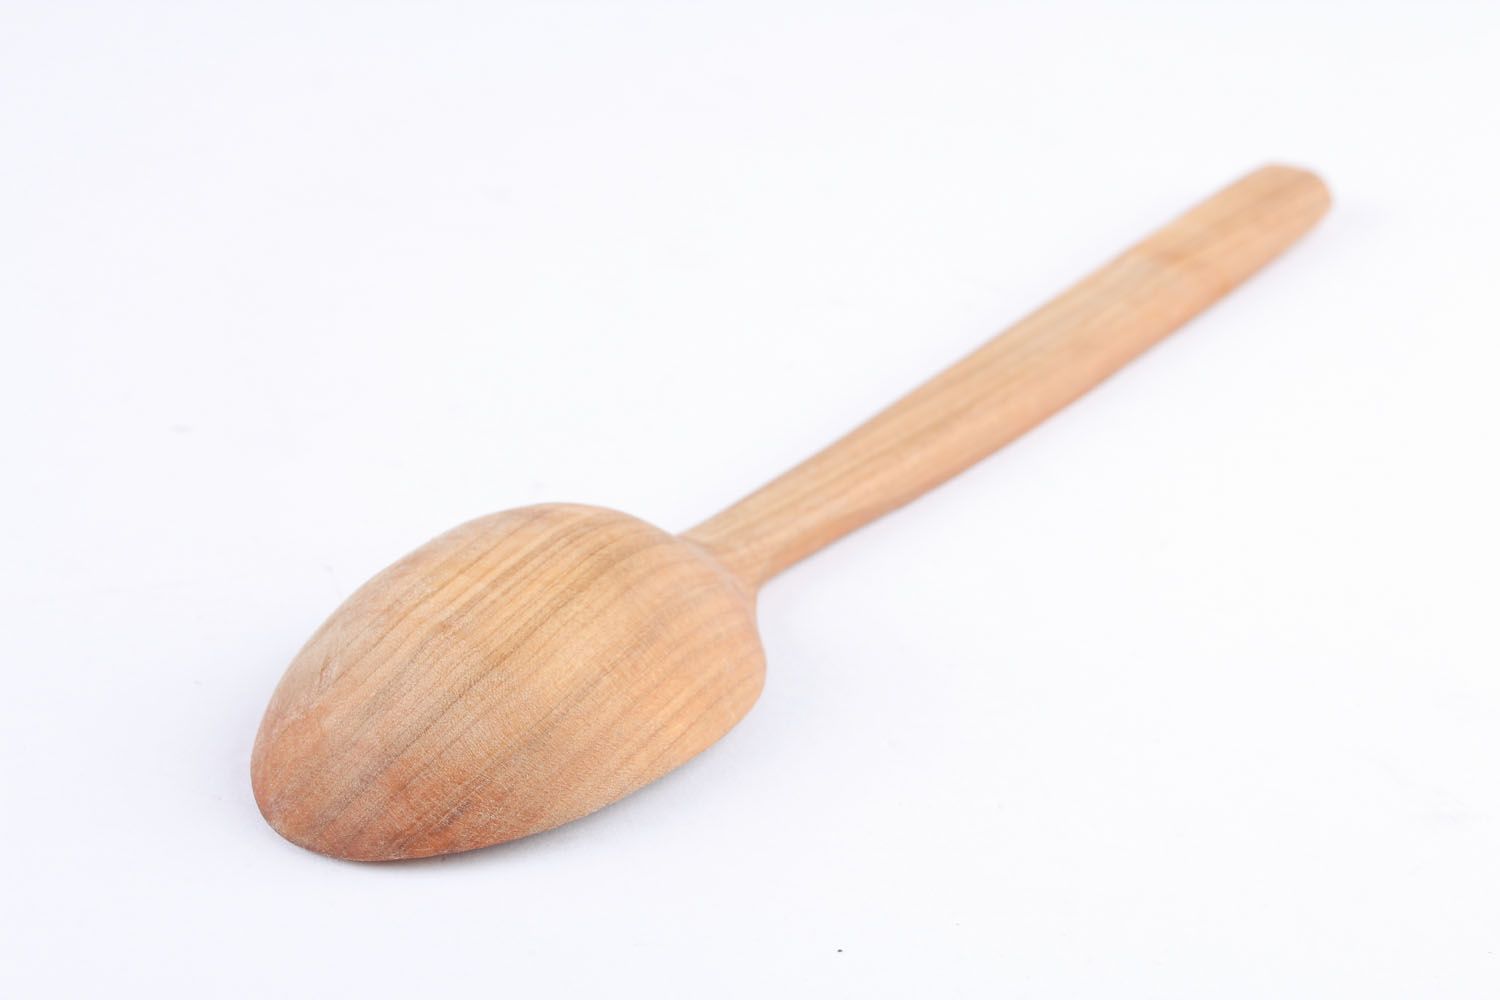 Homemade wooden spoon photo 1